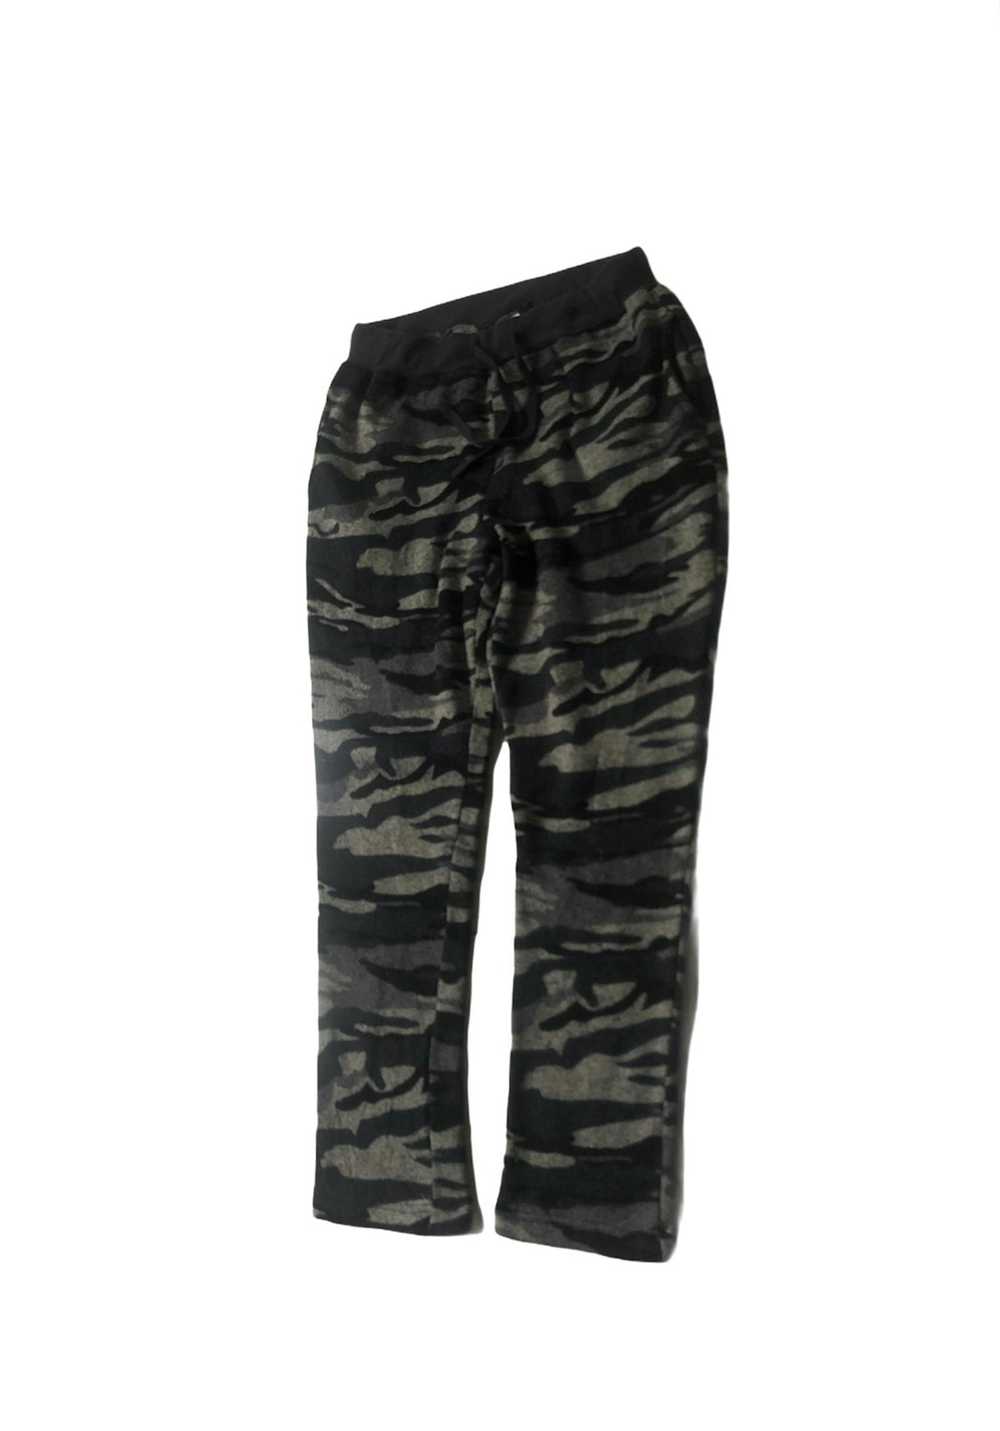 Other 🔥Military Styles Sweatpants - image 3